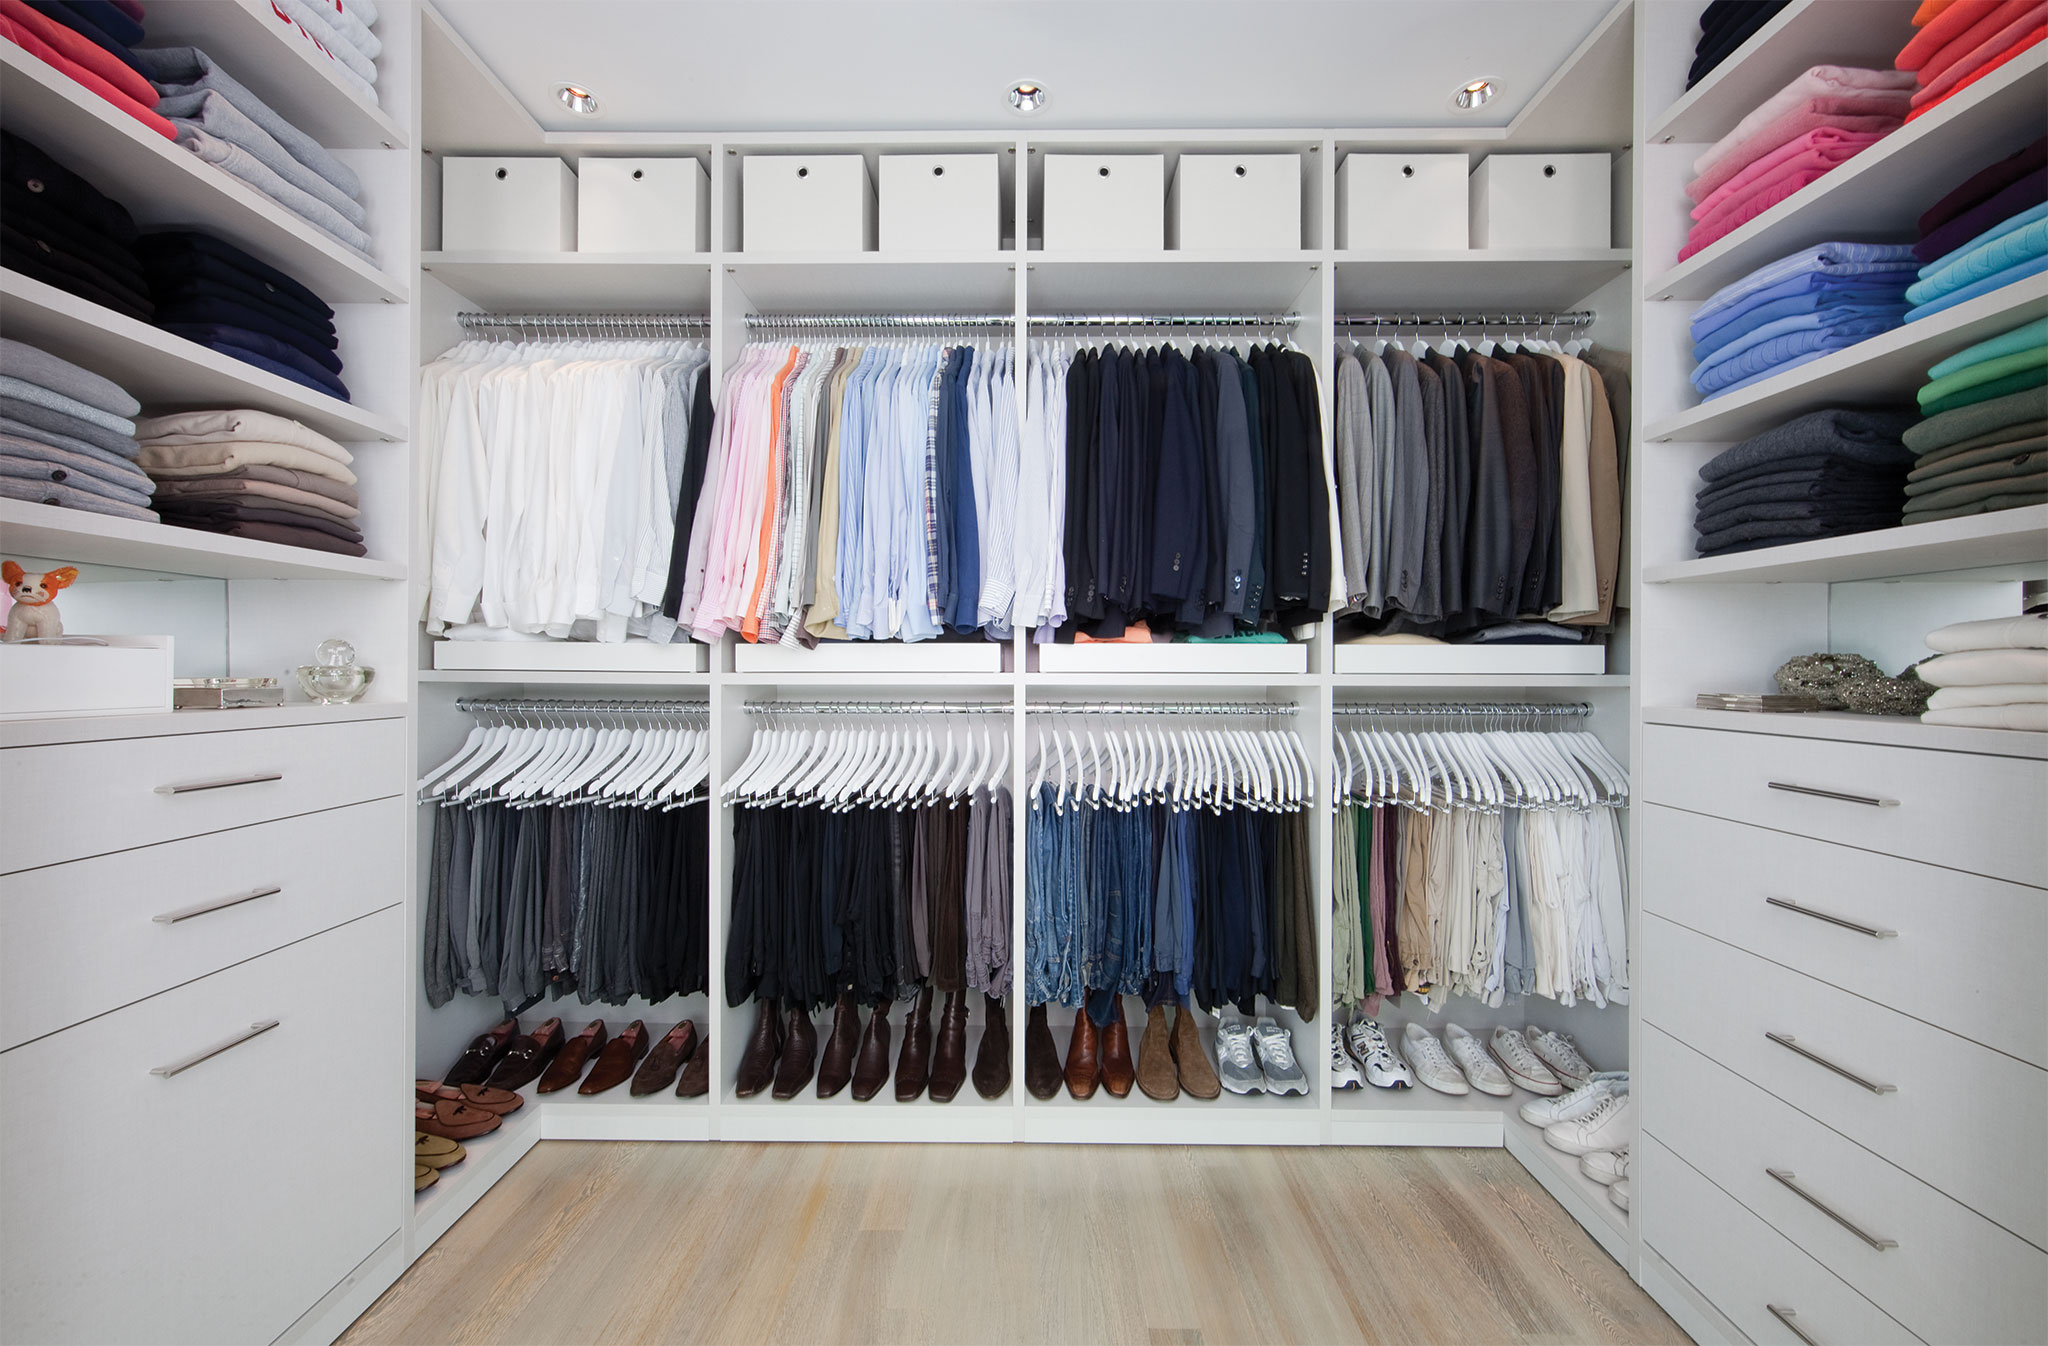 How To Organize A Closet Without Hangers: 8 Expert Ideas